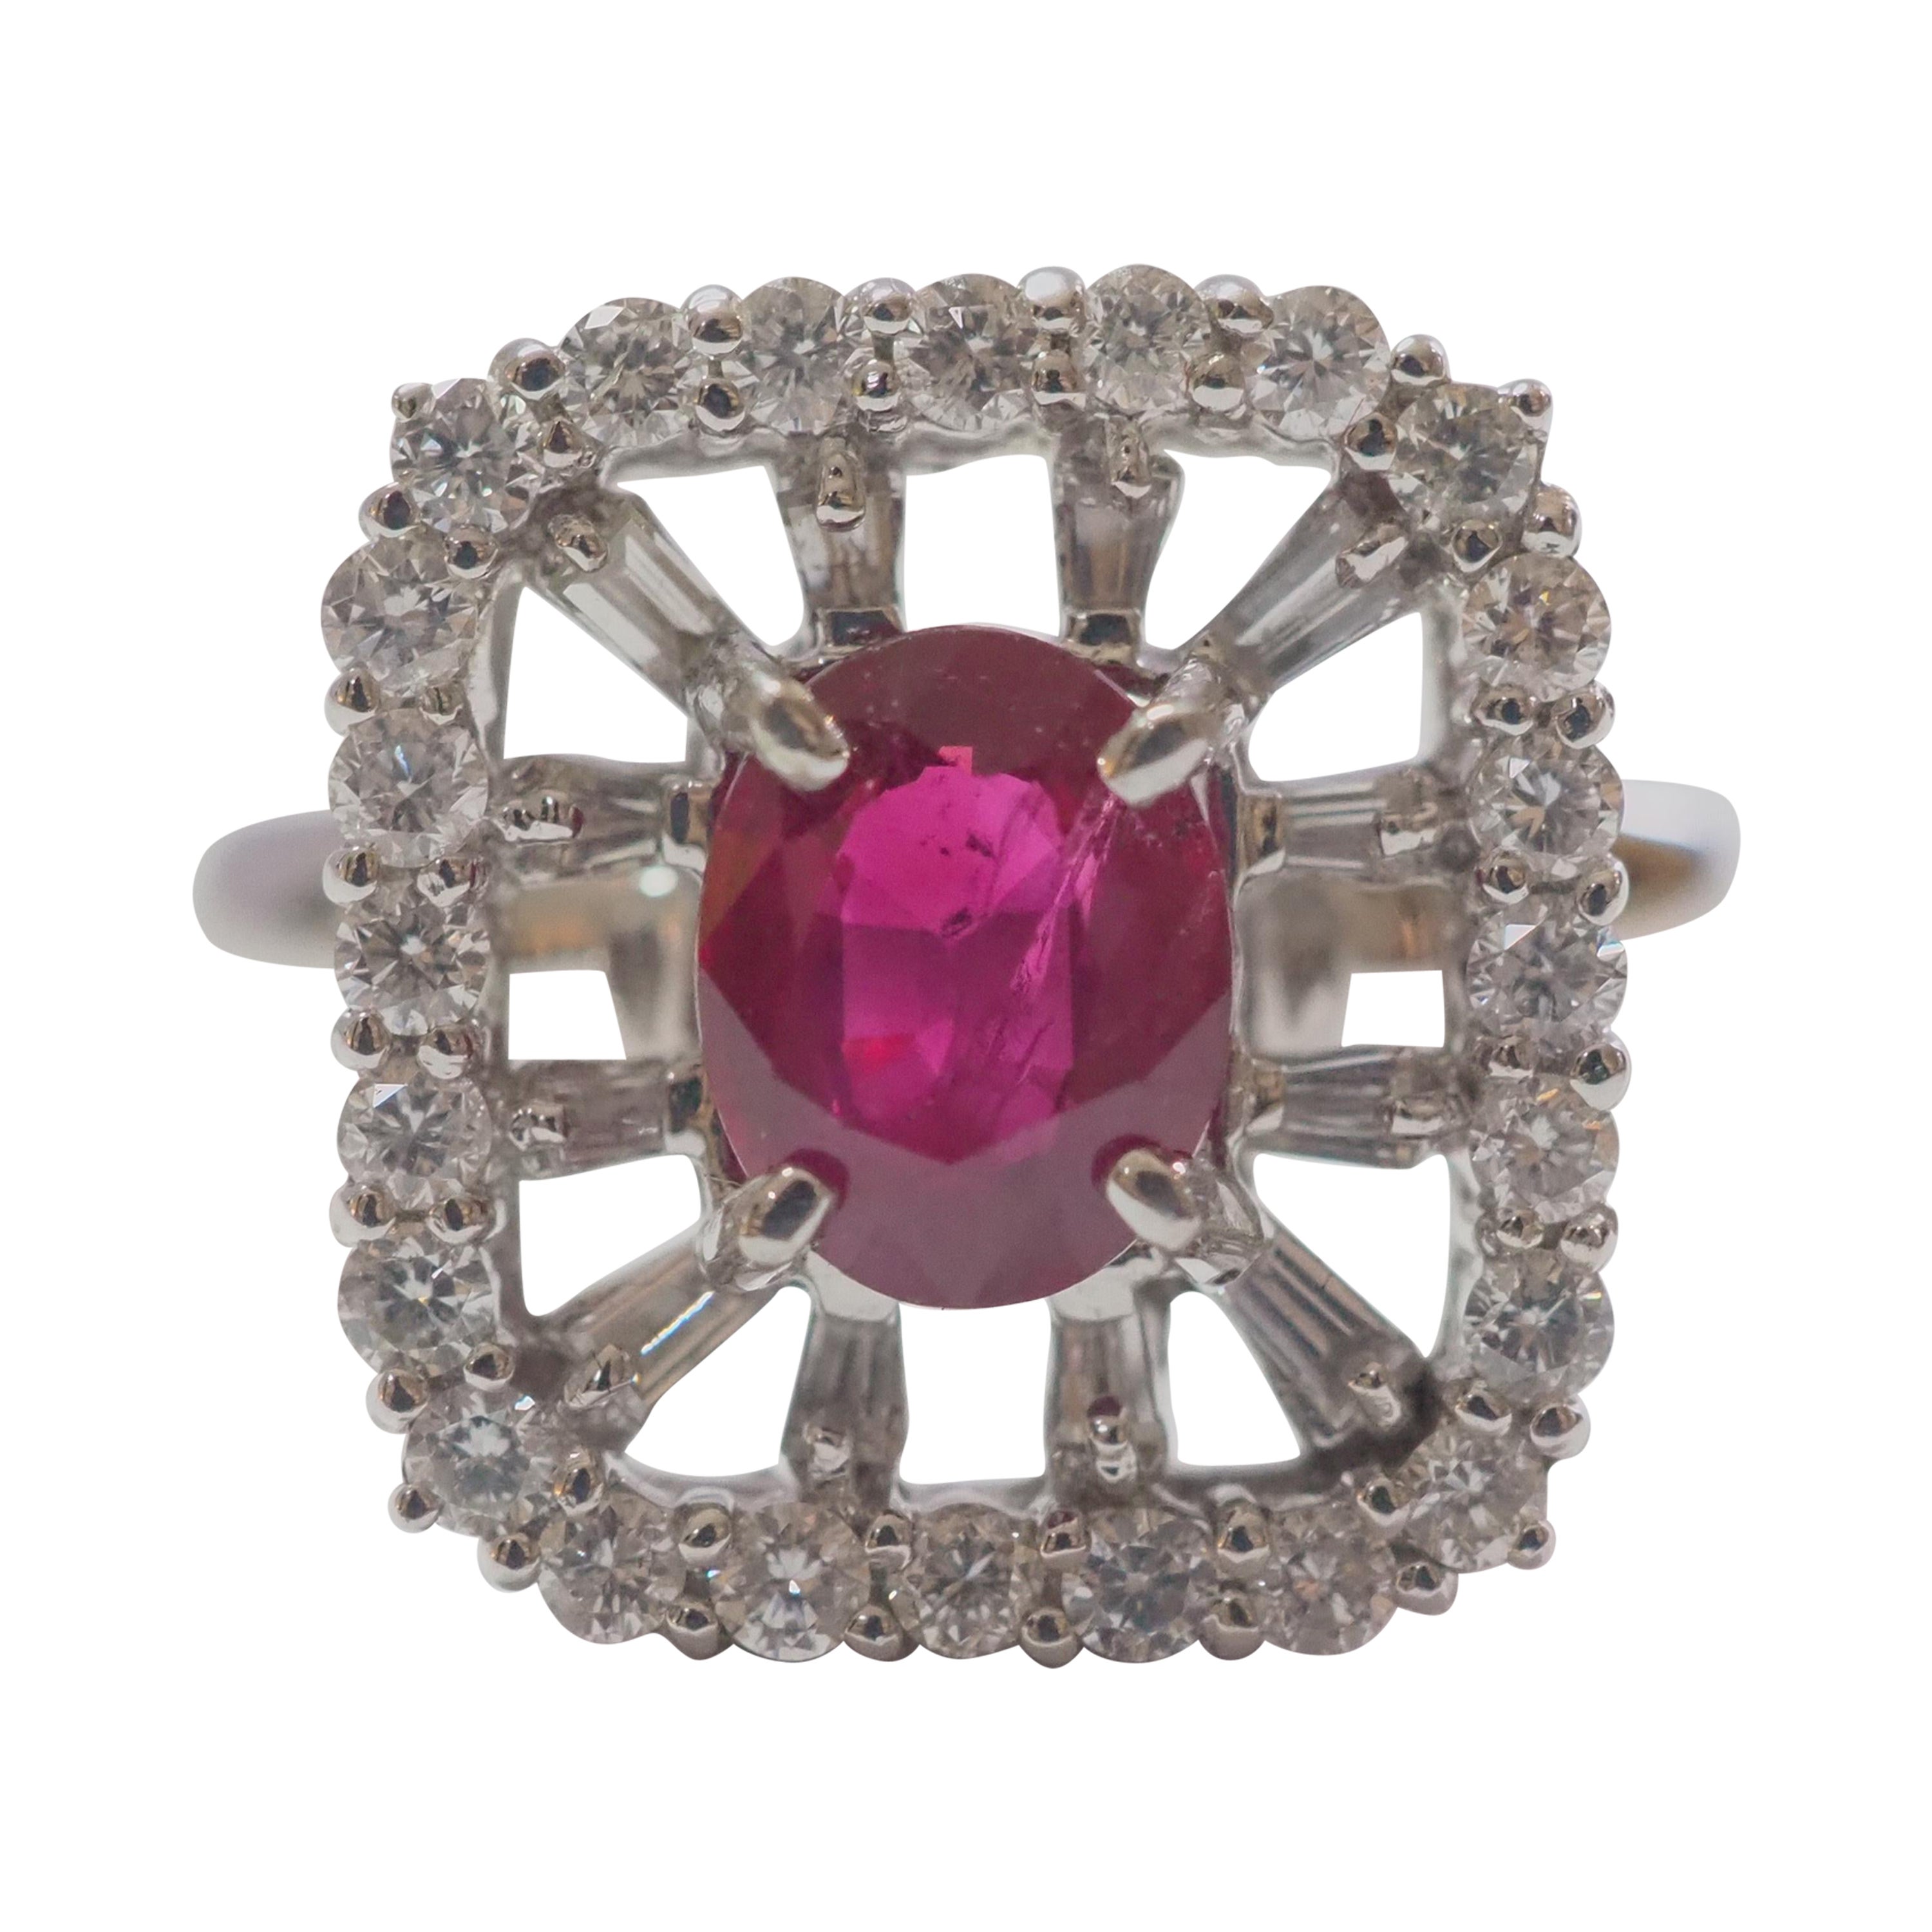 AIGS 18k White Gold 1.28ct Oval Thai Ruby & 0.7ct Diamond Cocktail Ring